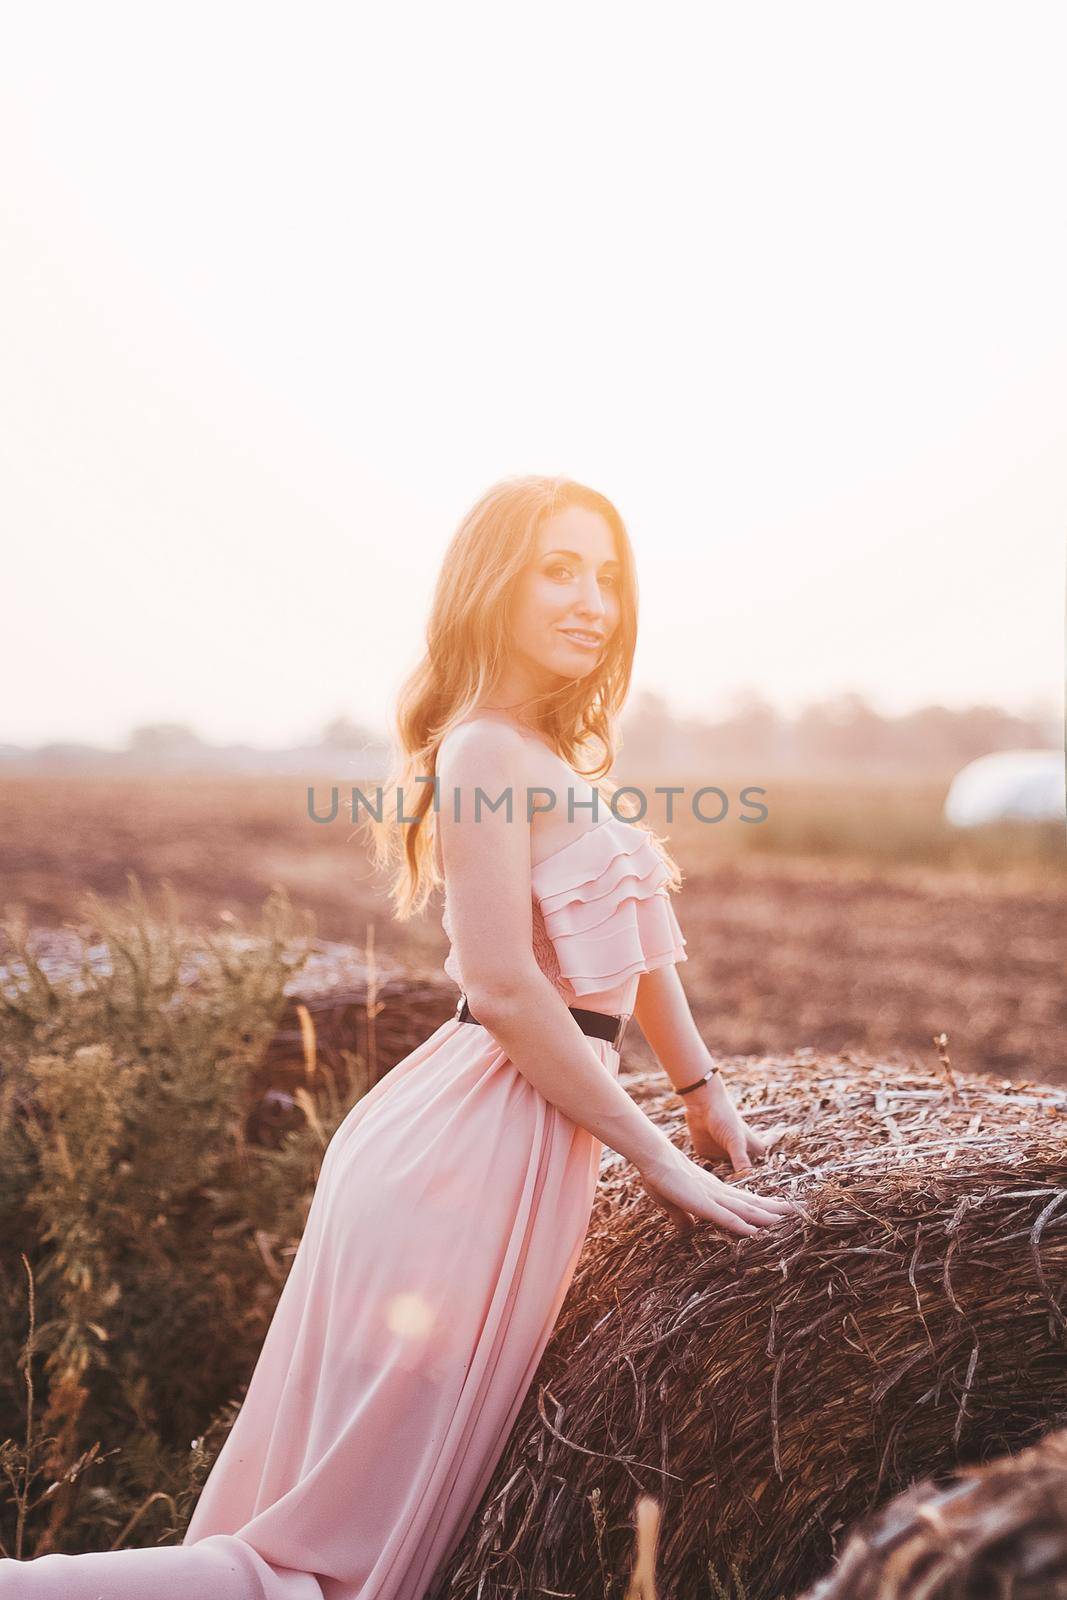 Beautiful romantic model girl outdoors dressed in tender long dress in the field in sunset light. Wind blowing long hair. Glow Sun, Sunshine. Backlit. Toned in warm colors by mmp1206